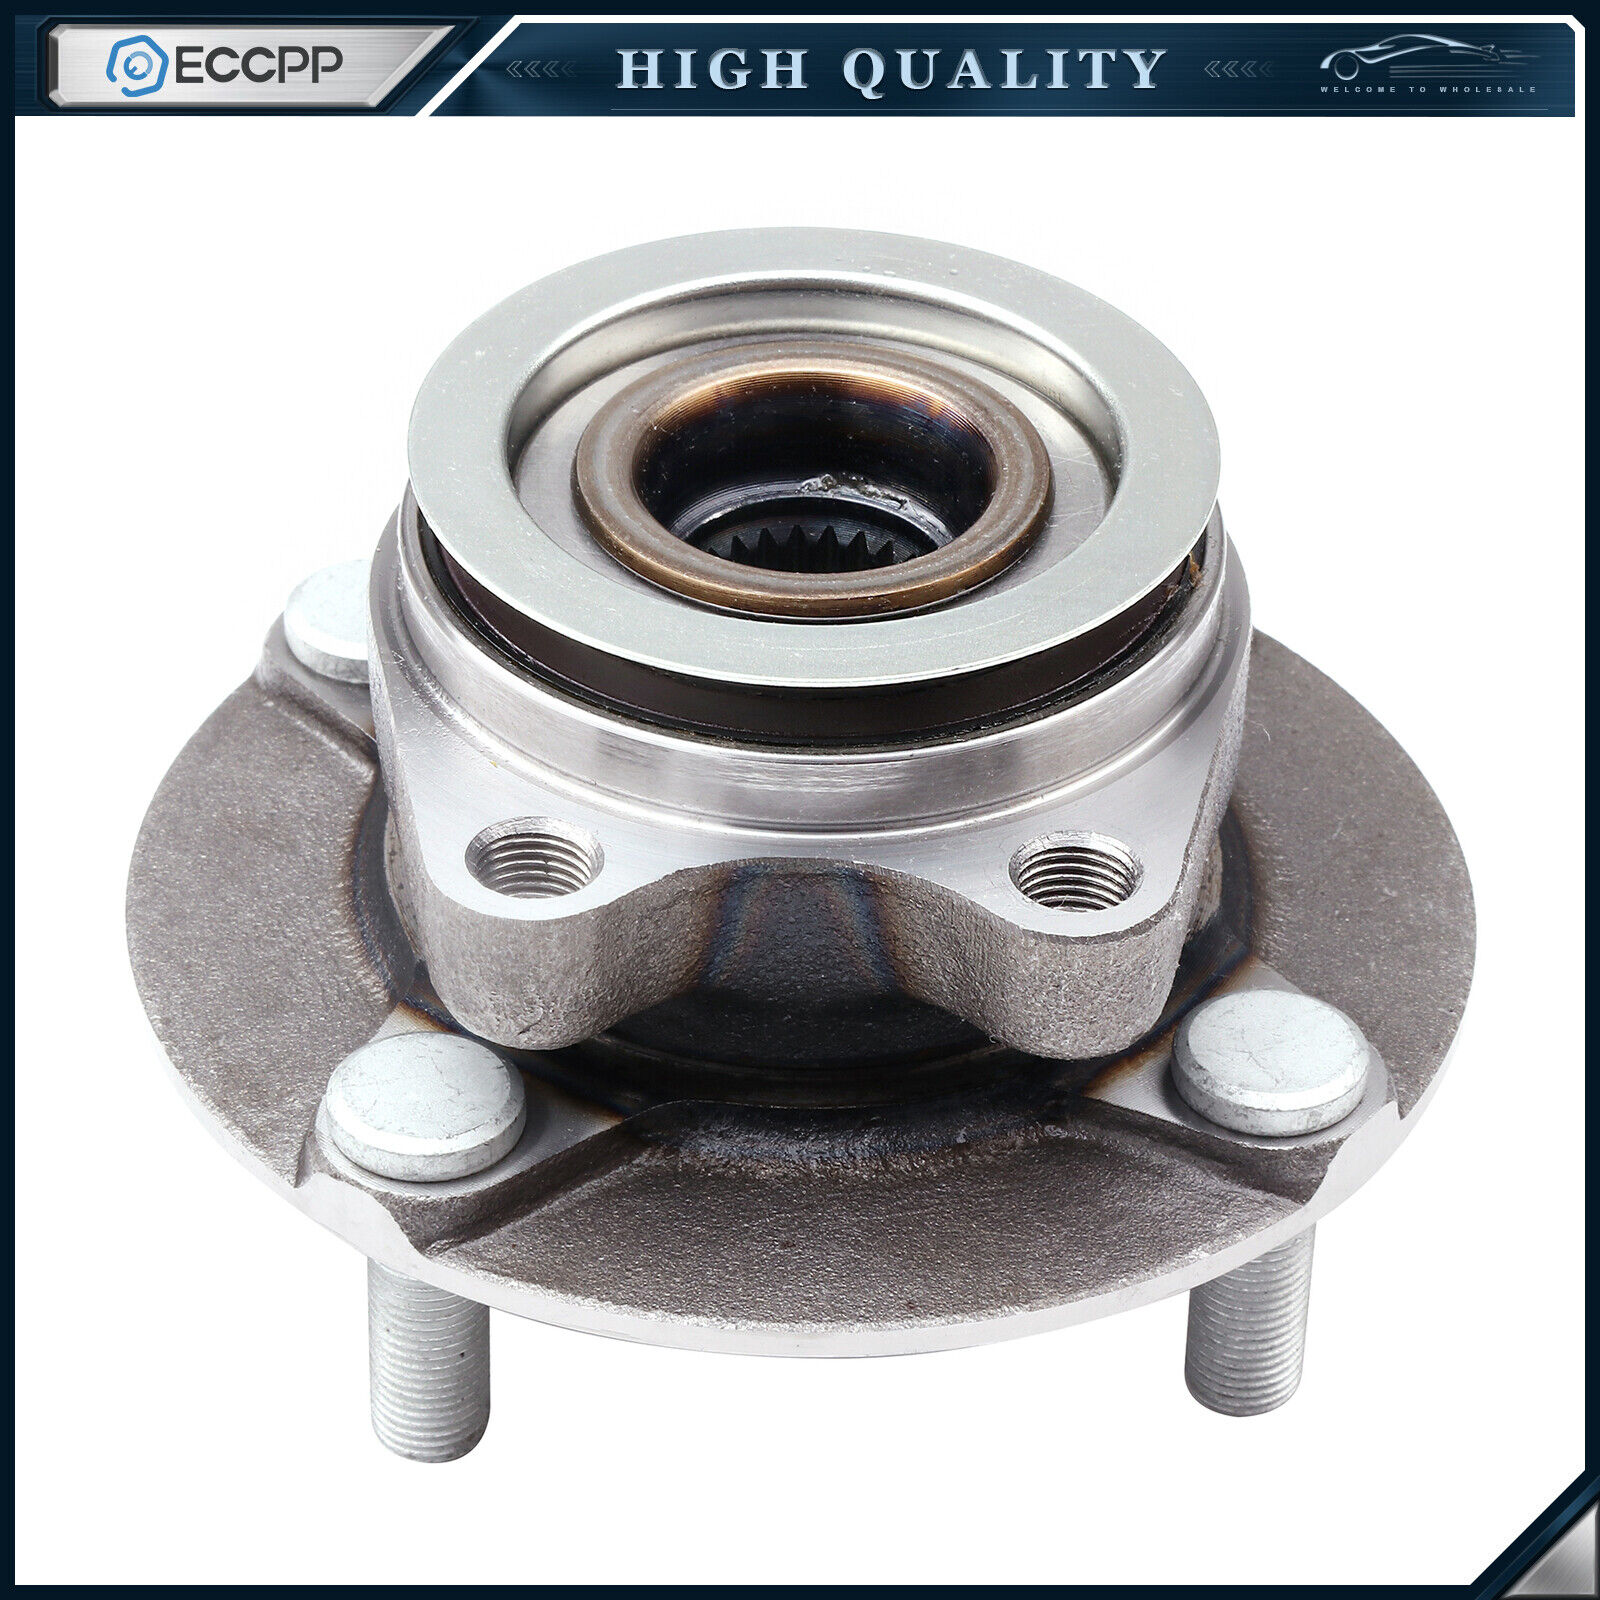 1Pc Wheel Hub Bearing Assembly Front FWD For Nissan Cube 2009 2010-2014 W/ ABS